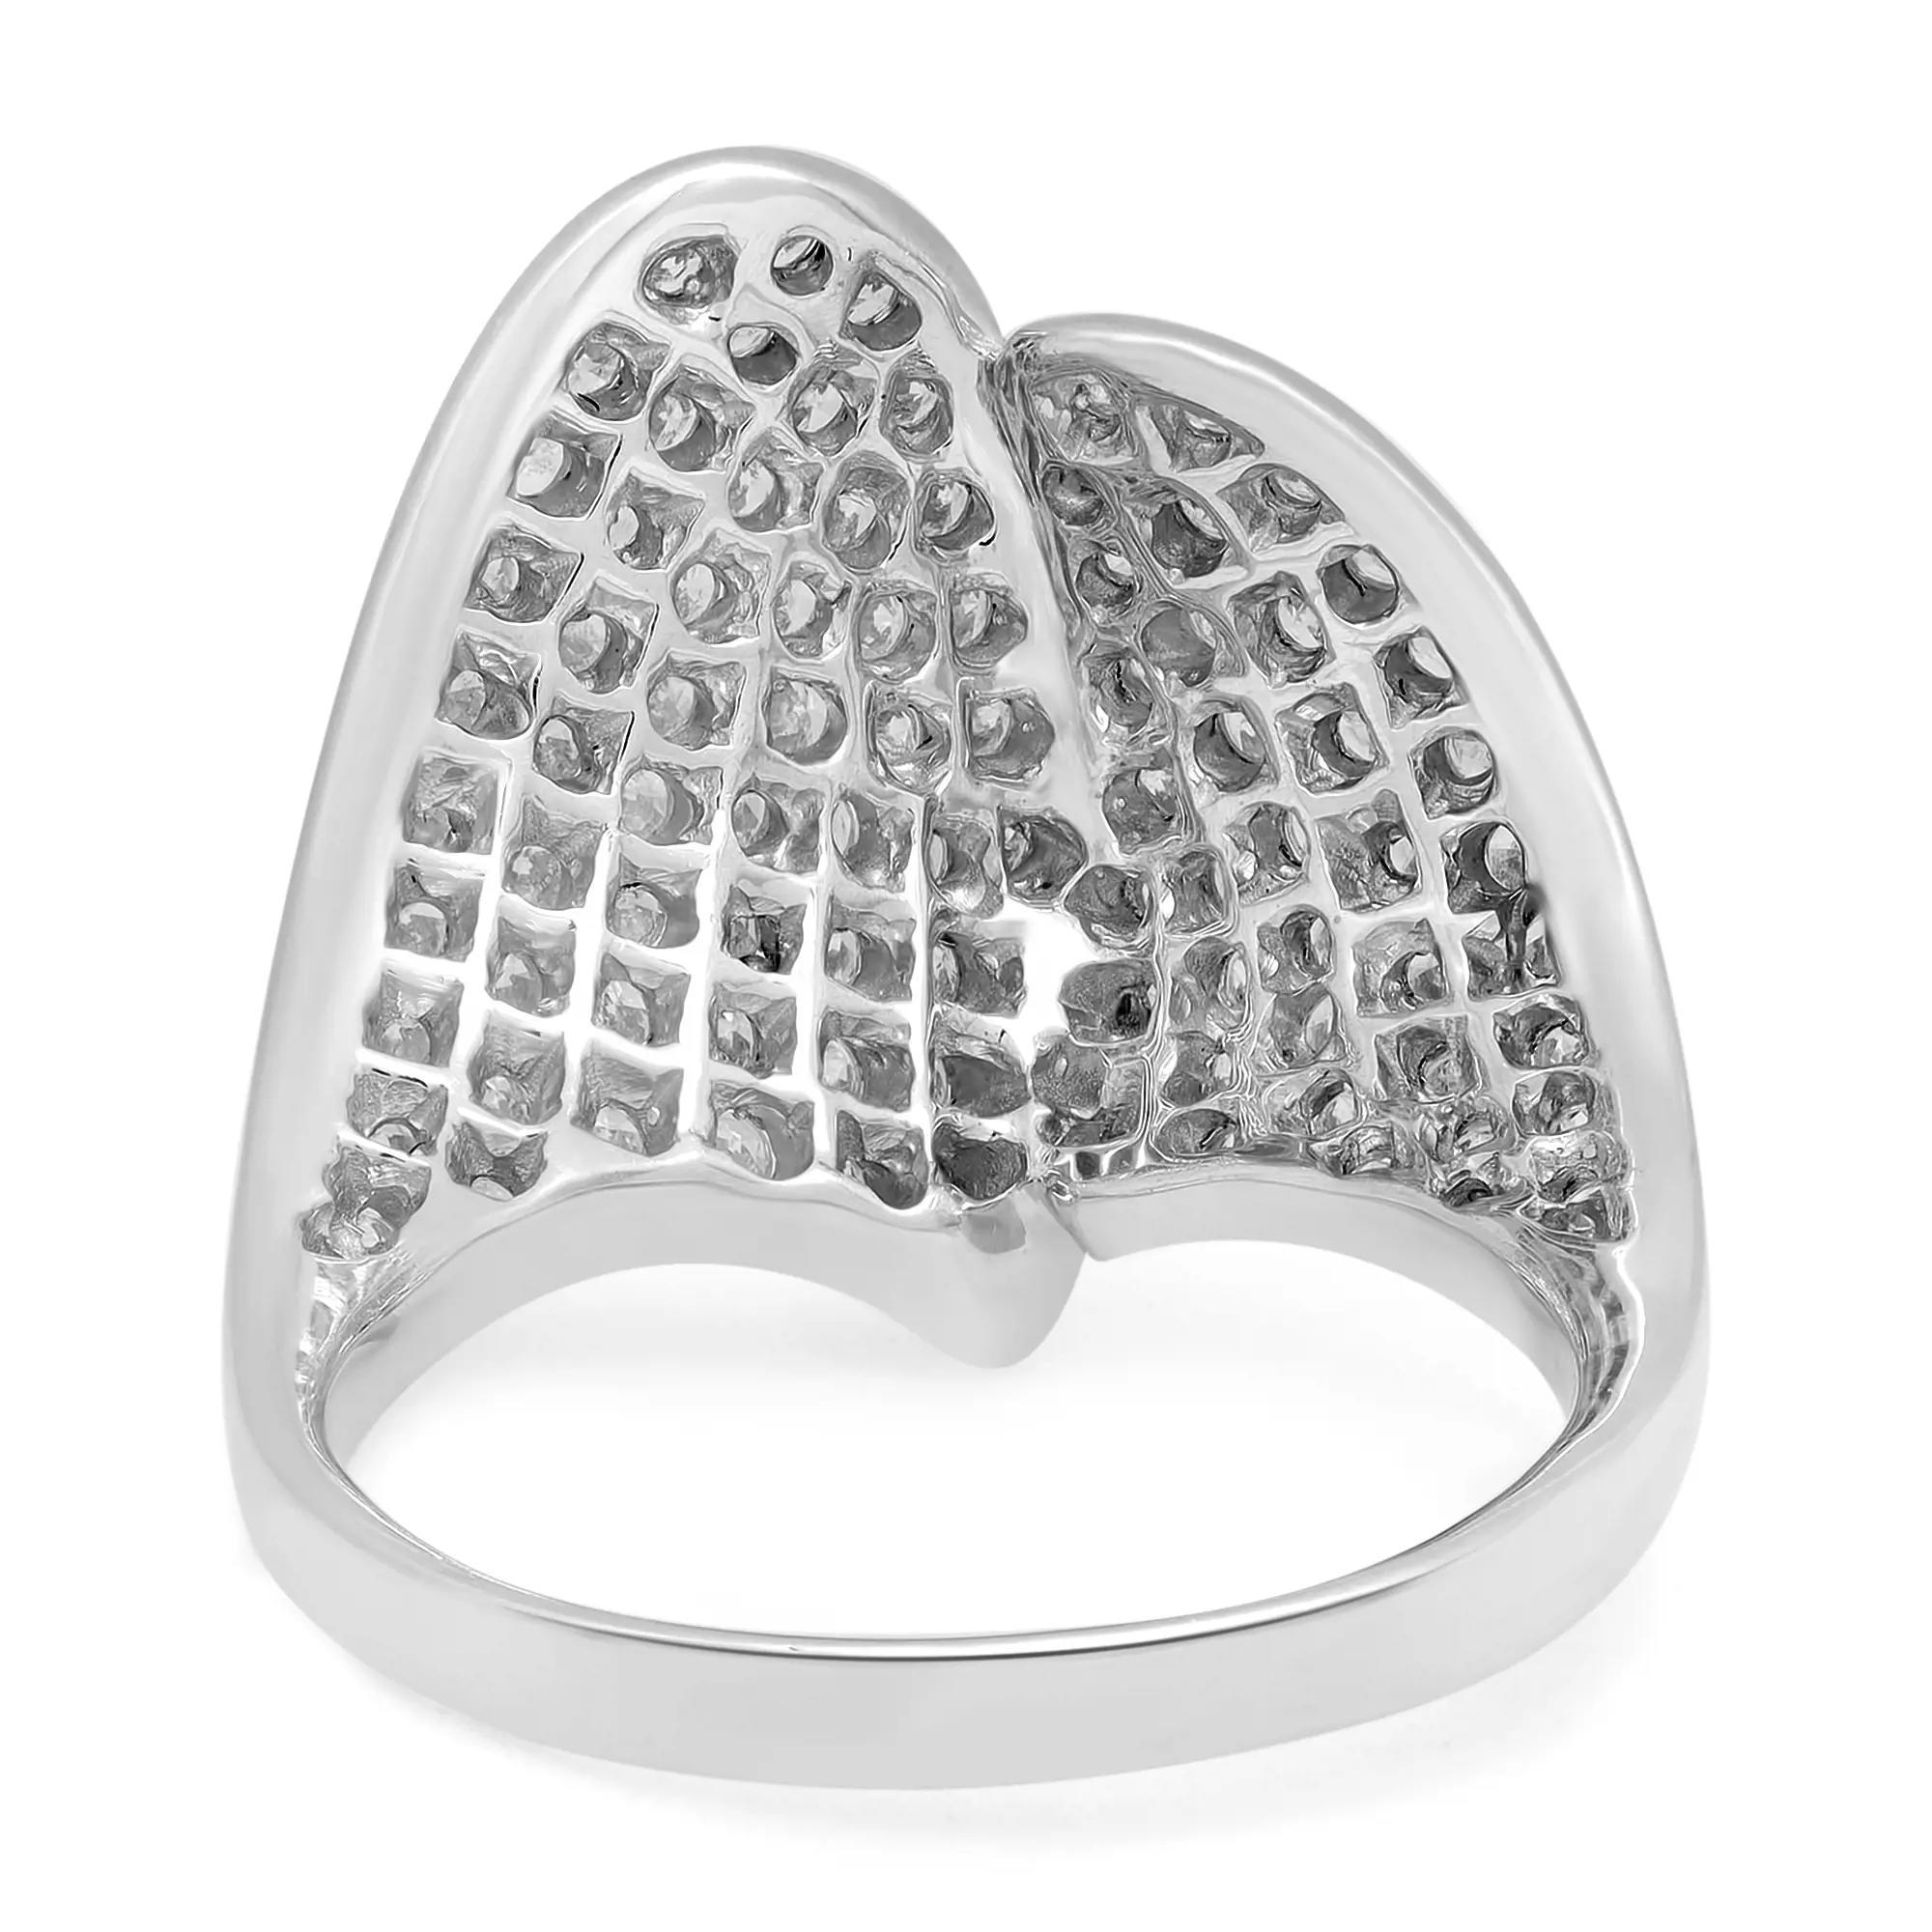 Modern 1.58cttw Pave Set Round Cut Diamond Ladies Cocktail Ring 14k White Gold For Sale